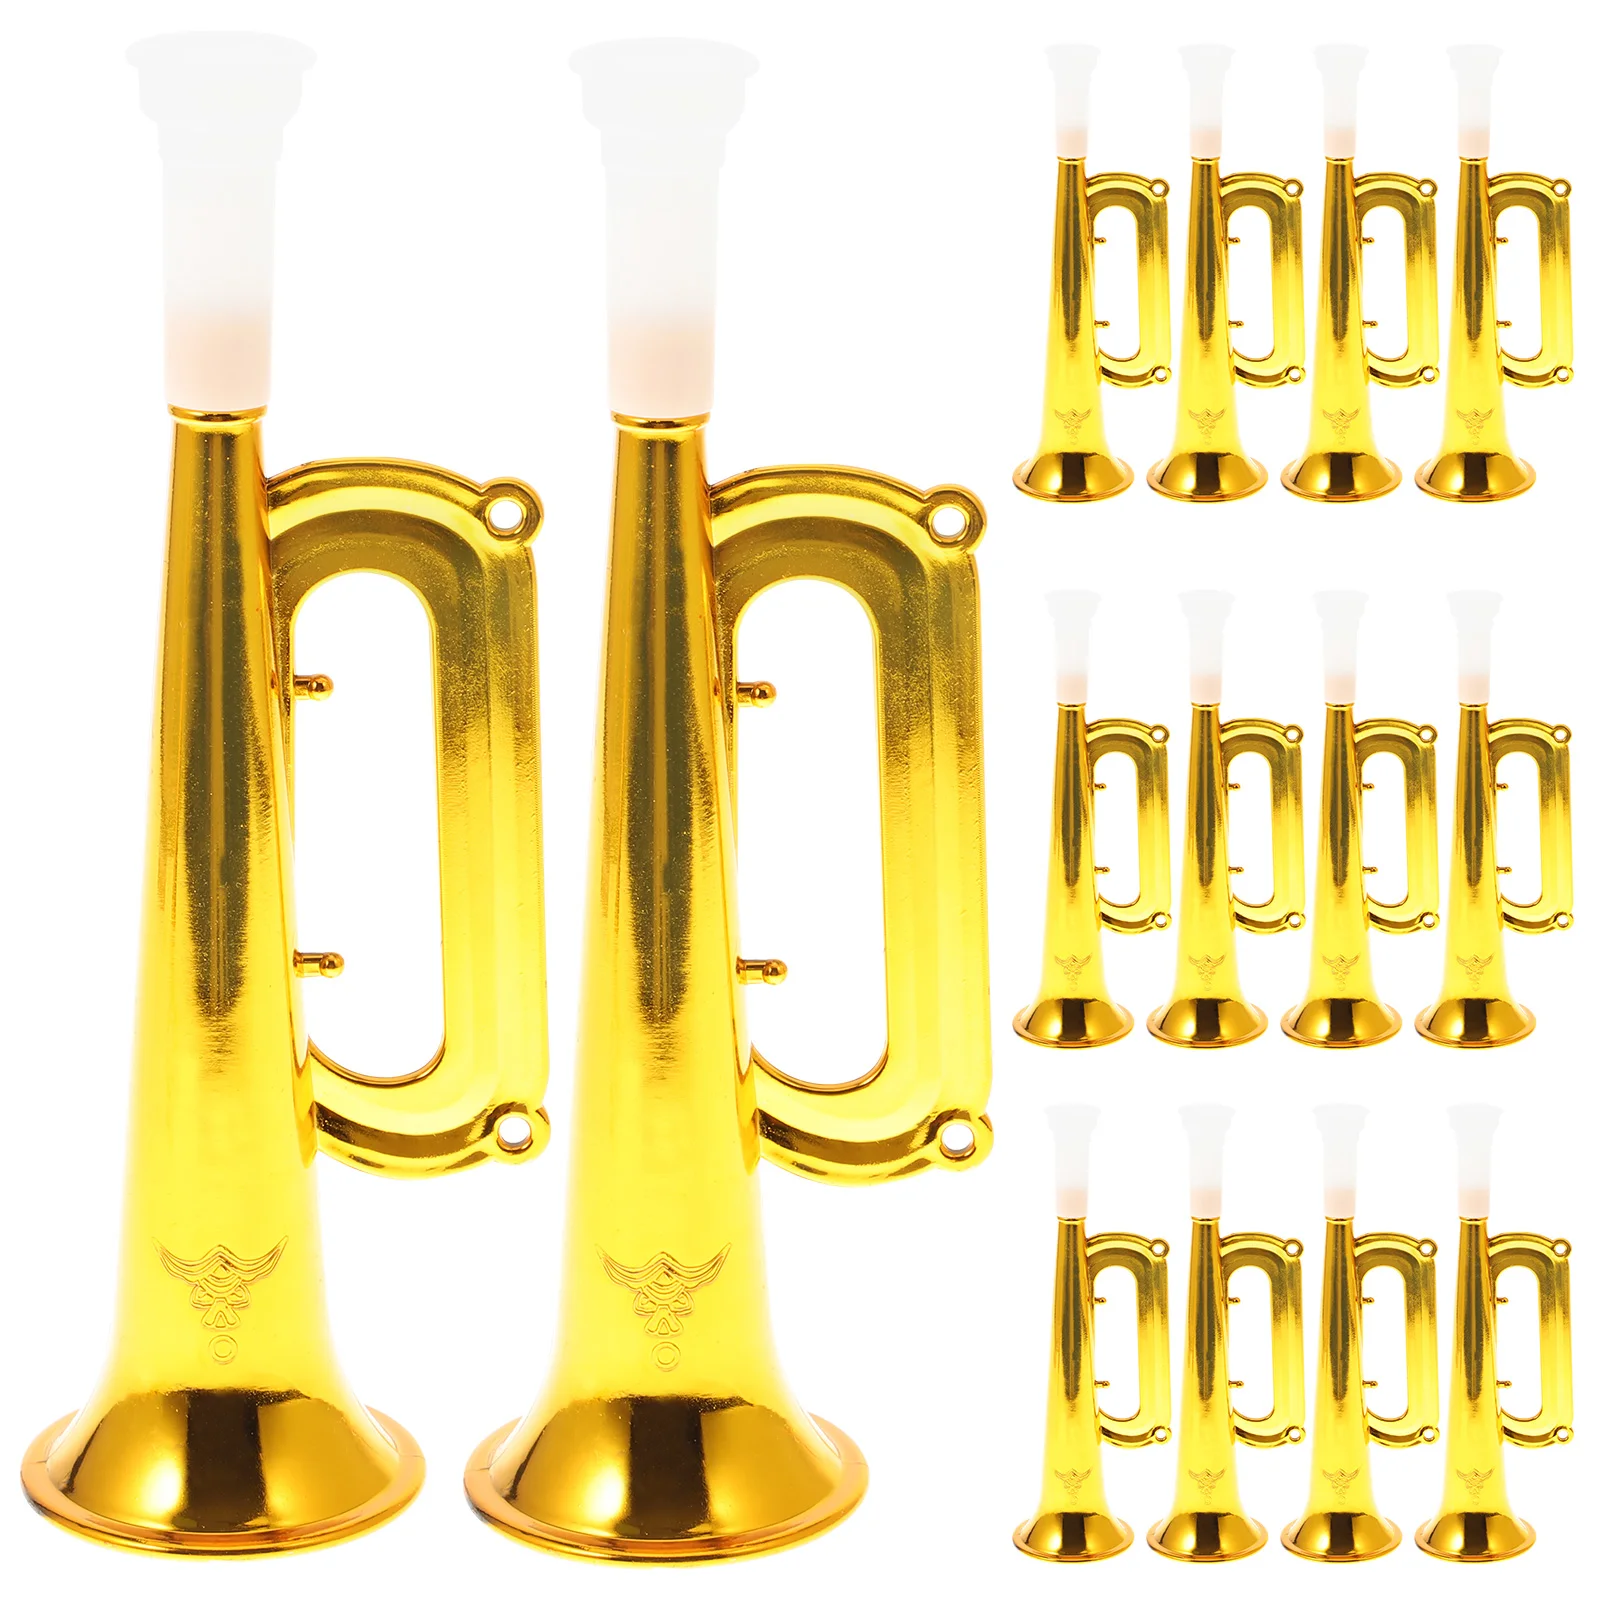 

14pcs Trumpet Sound Toys Trumpet Musical Instruments Noise Makers Educational Favors Gifts